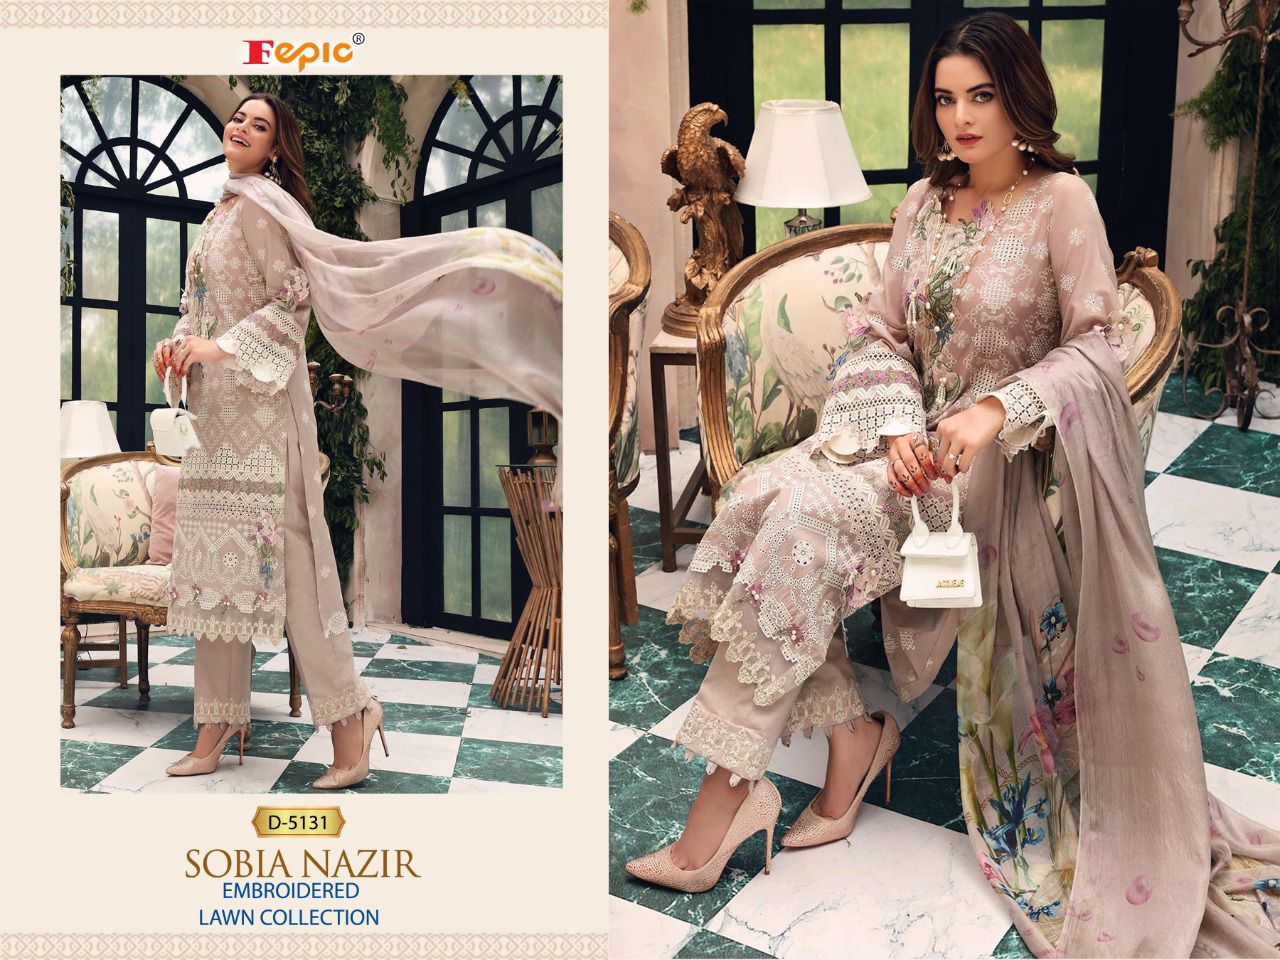 Fepic Rosemeen Sobia Nazir Lawn Collection 5131